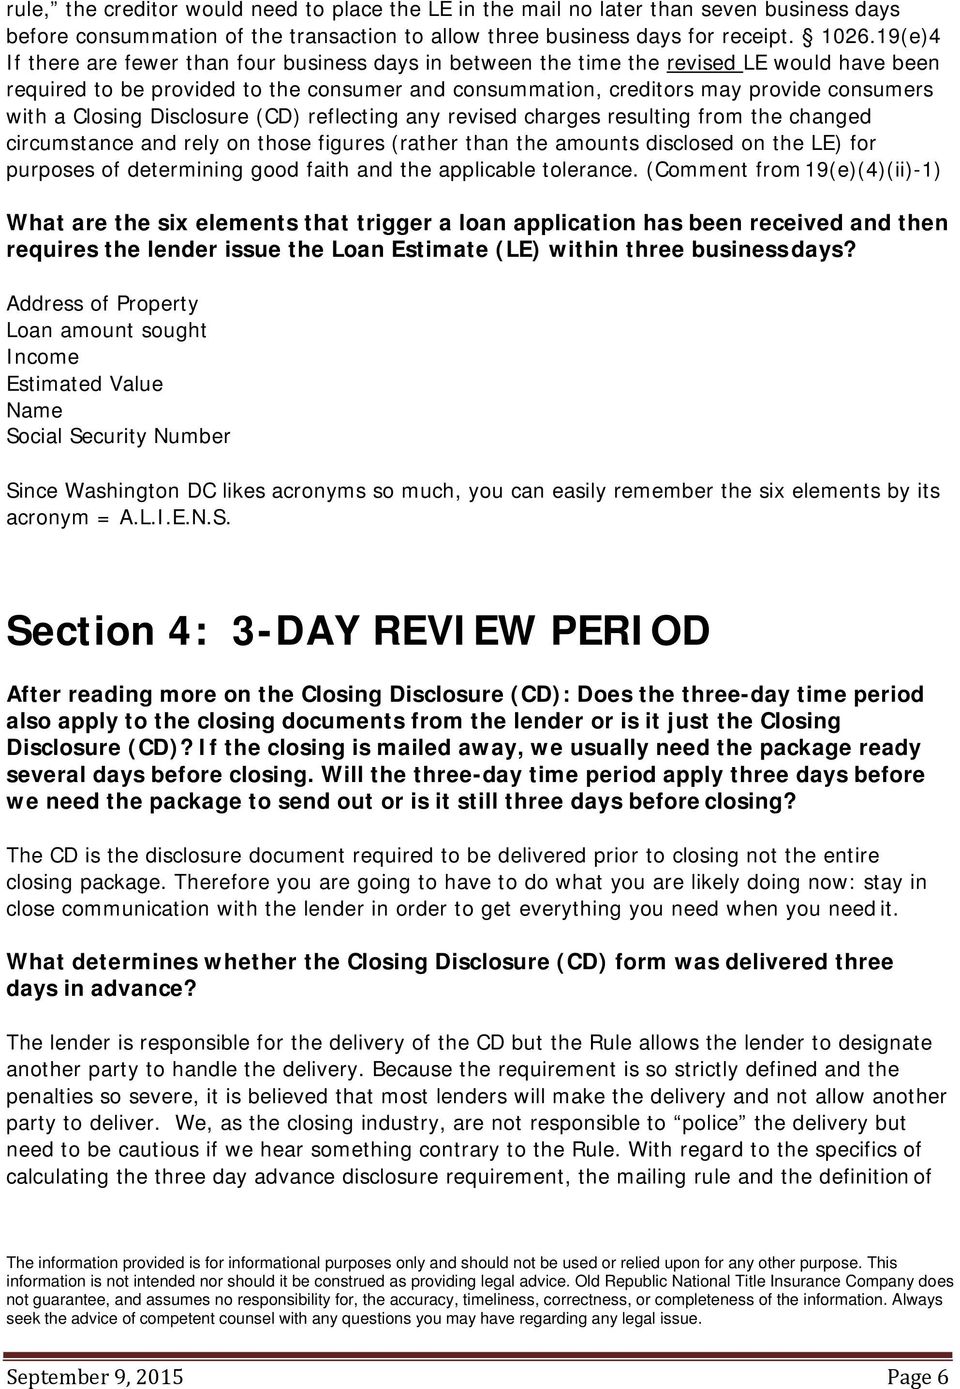 Closing Disclosure (CD) reflecting any revised charges resulting from the changed circumstance and rely on those figures (rather than the amounts disclosed on the LE) for purposes of determining good